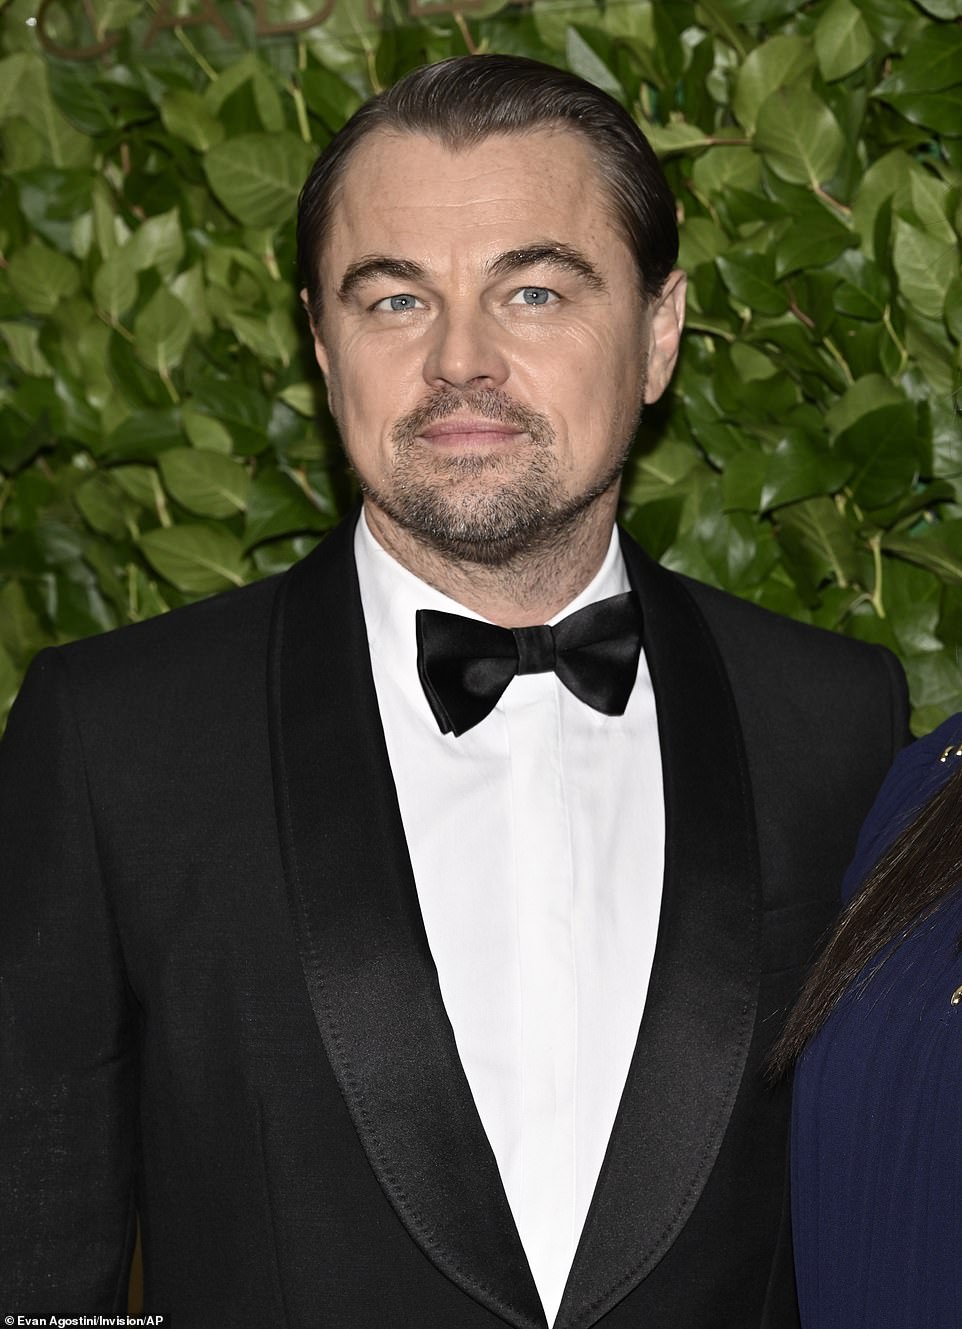 All dressed up: DiCaprio looked dapper in a suit and bow tie